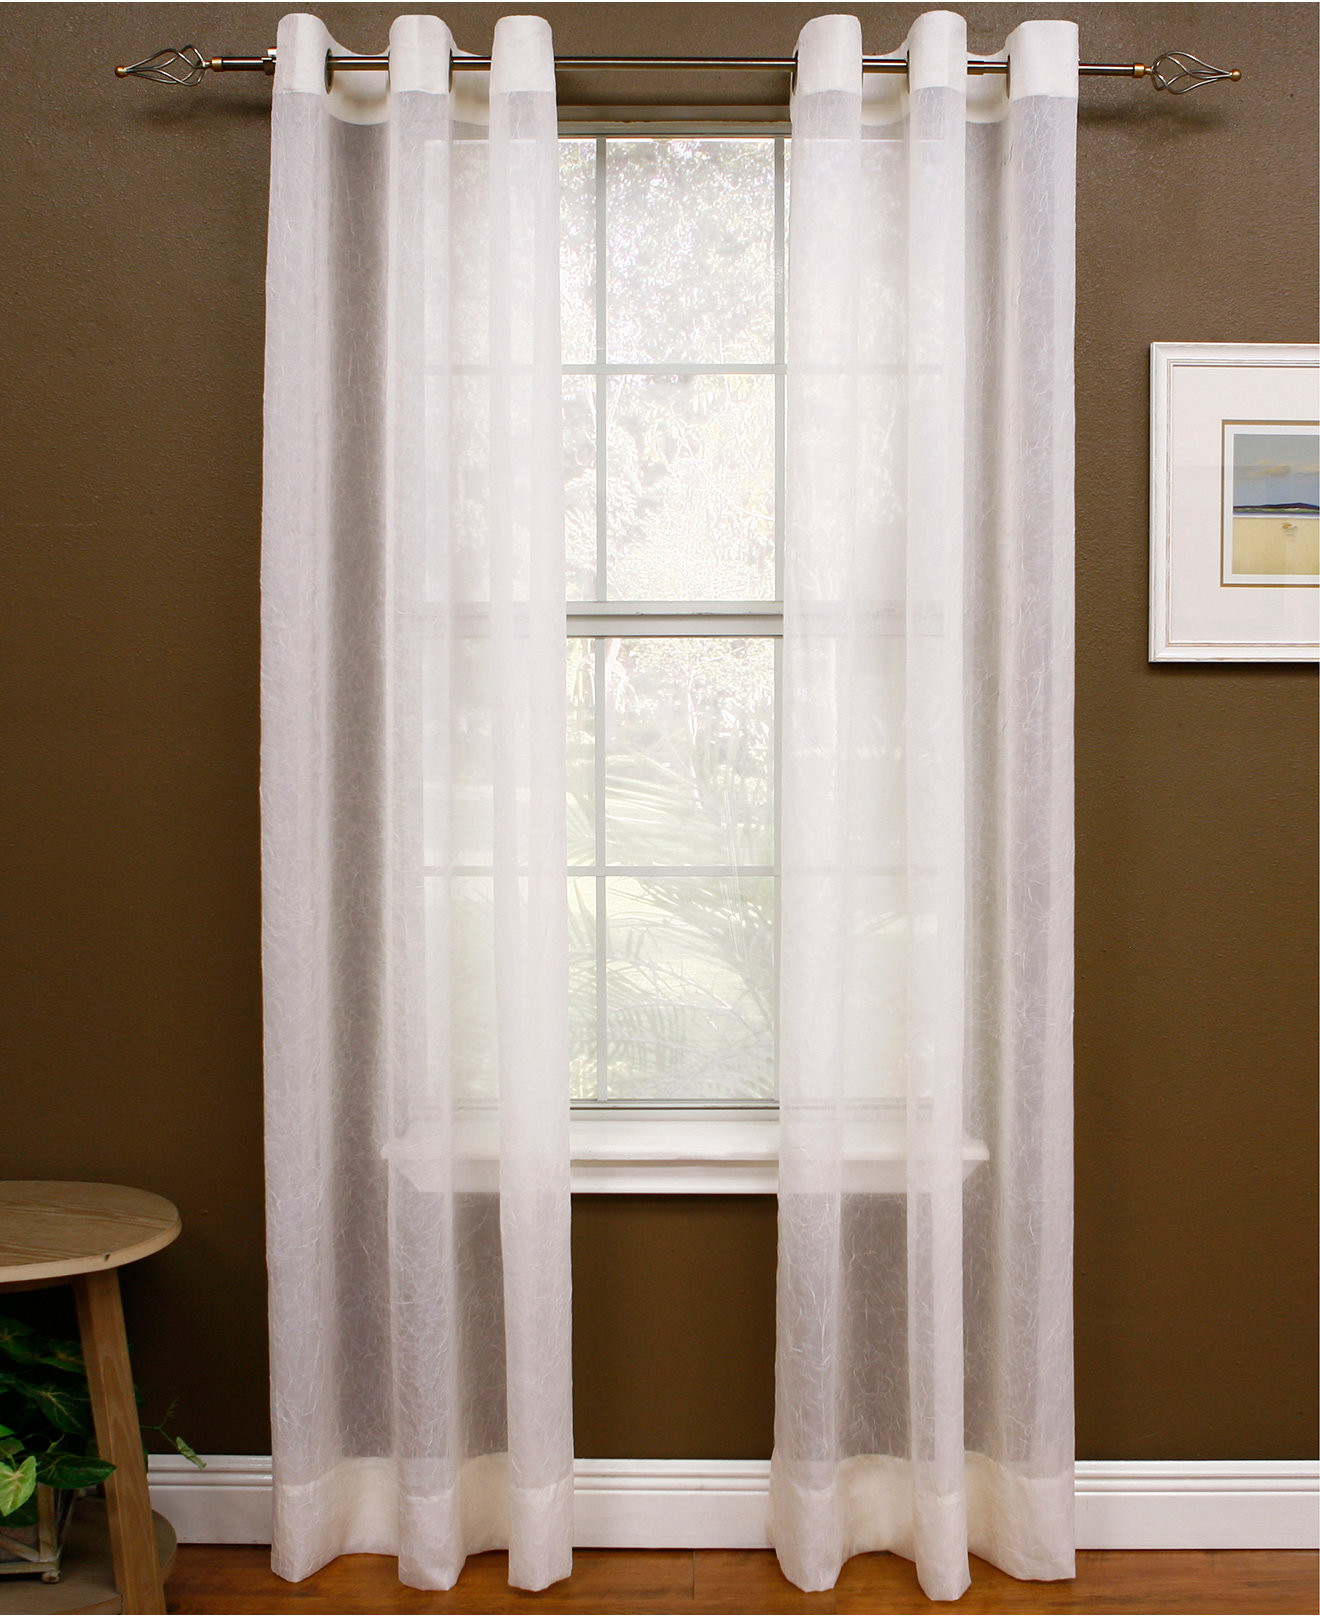 Macy Kitchen Curtains
 Curtain Give Your Space A Relaxing And Tranquil Look With